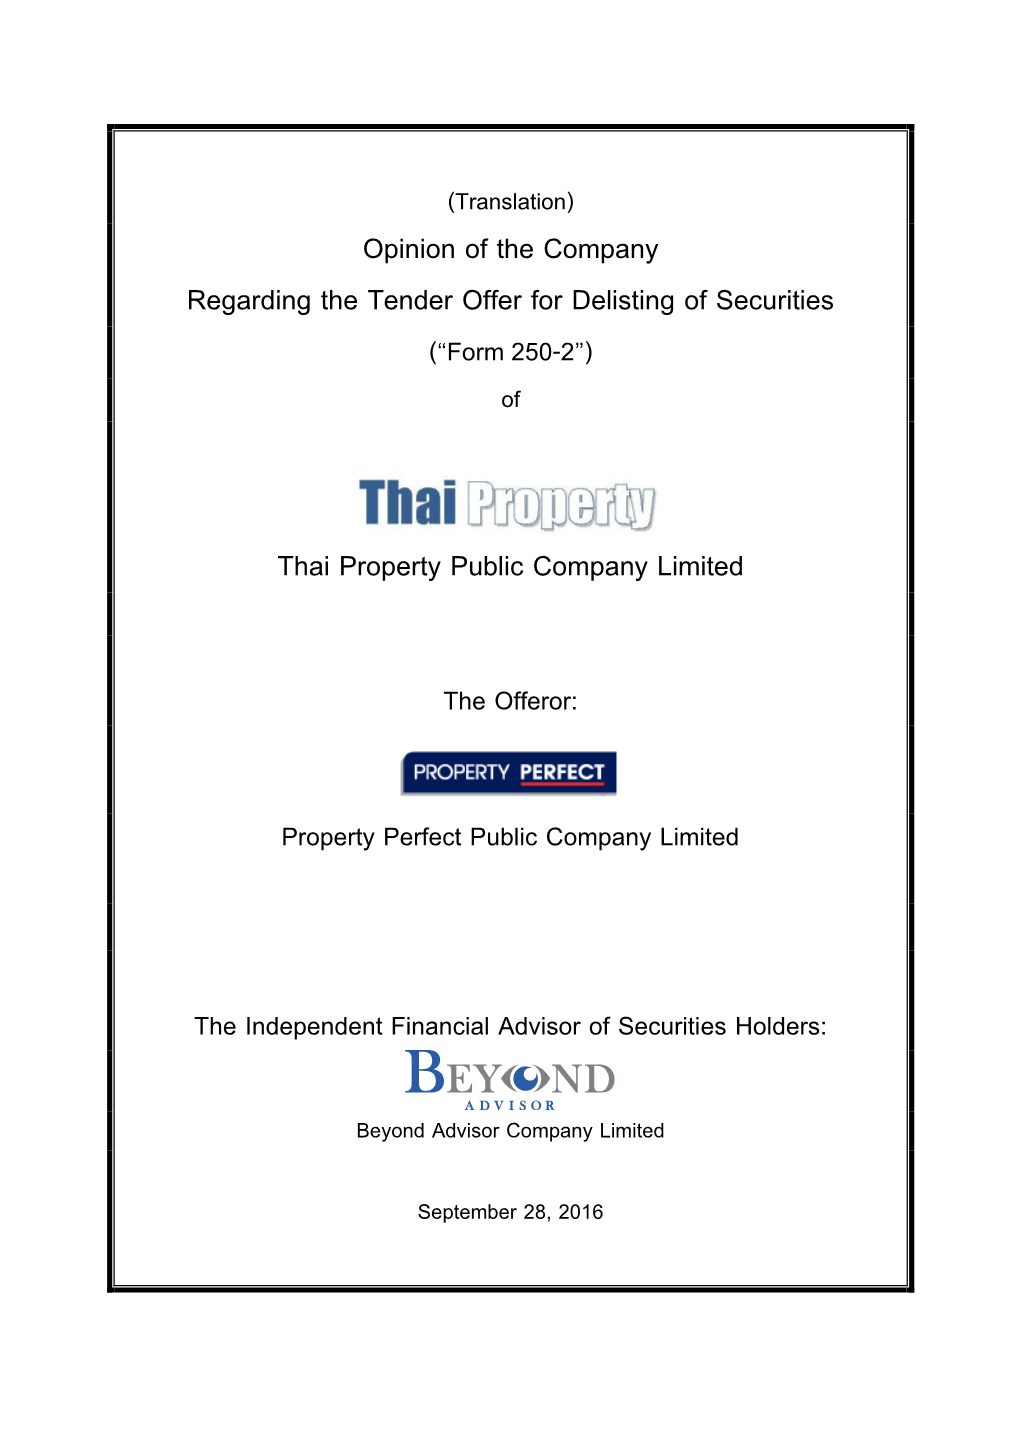 Opinion of the Company Regarding the Tender Offer for Delisting of Securities Thai Property Public Company Limited